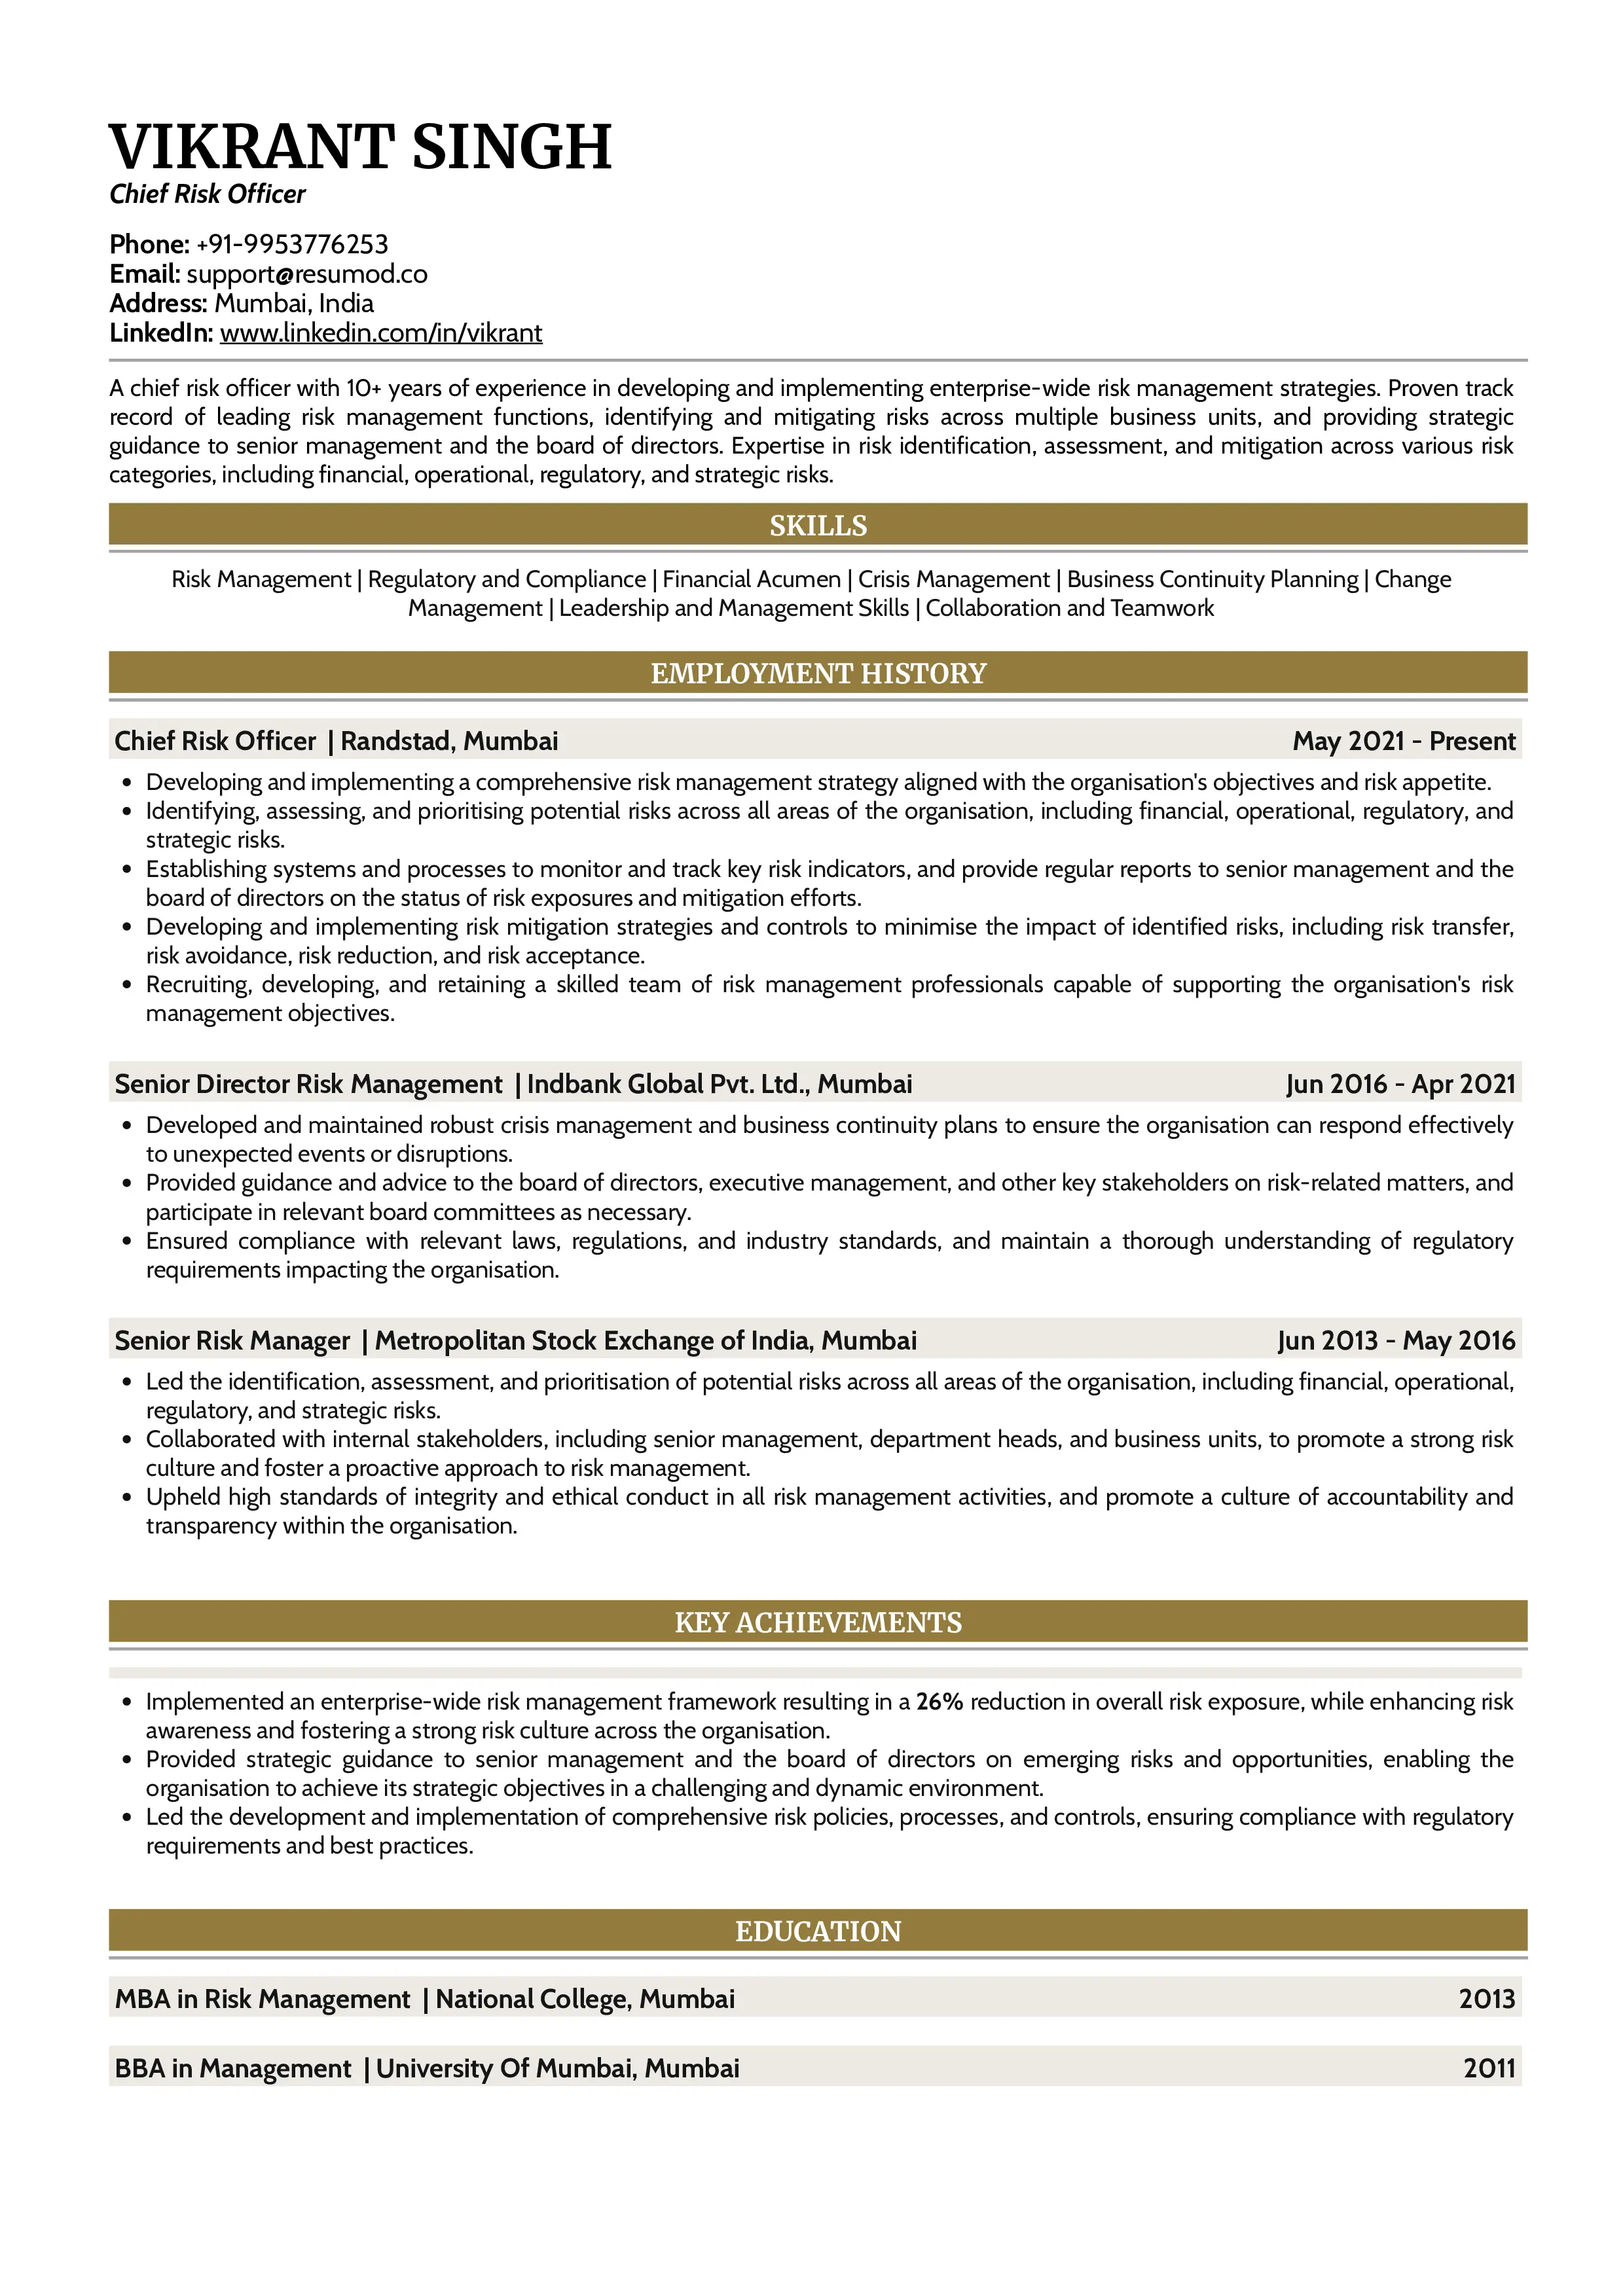 Sample Resume of Chief Risk Officer | Free Resume Templates & Samples on Resumod.co